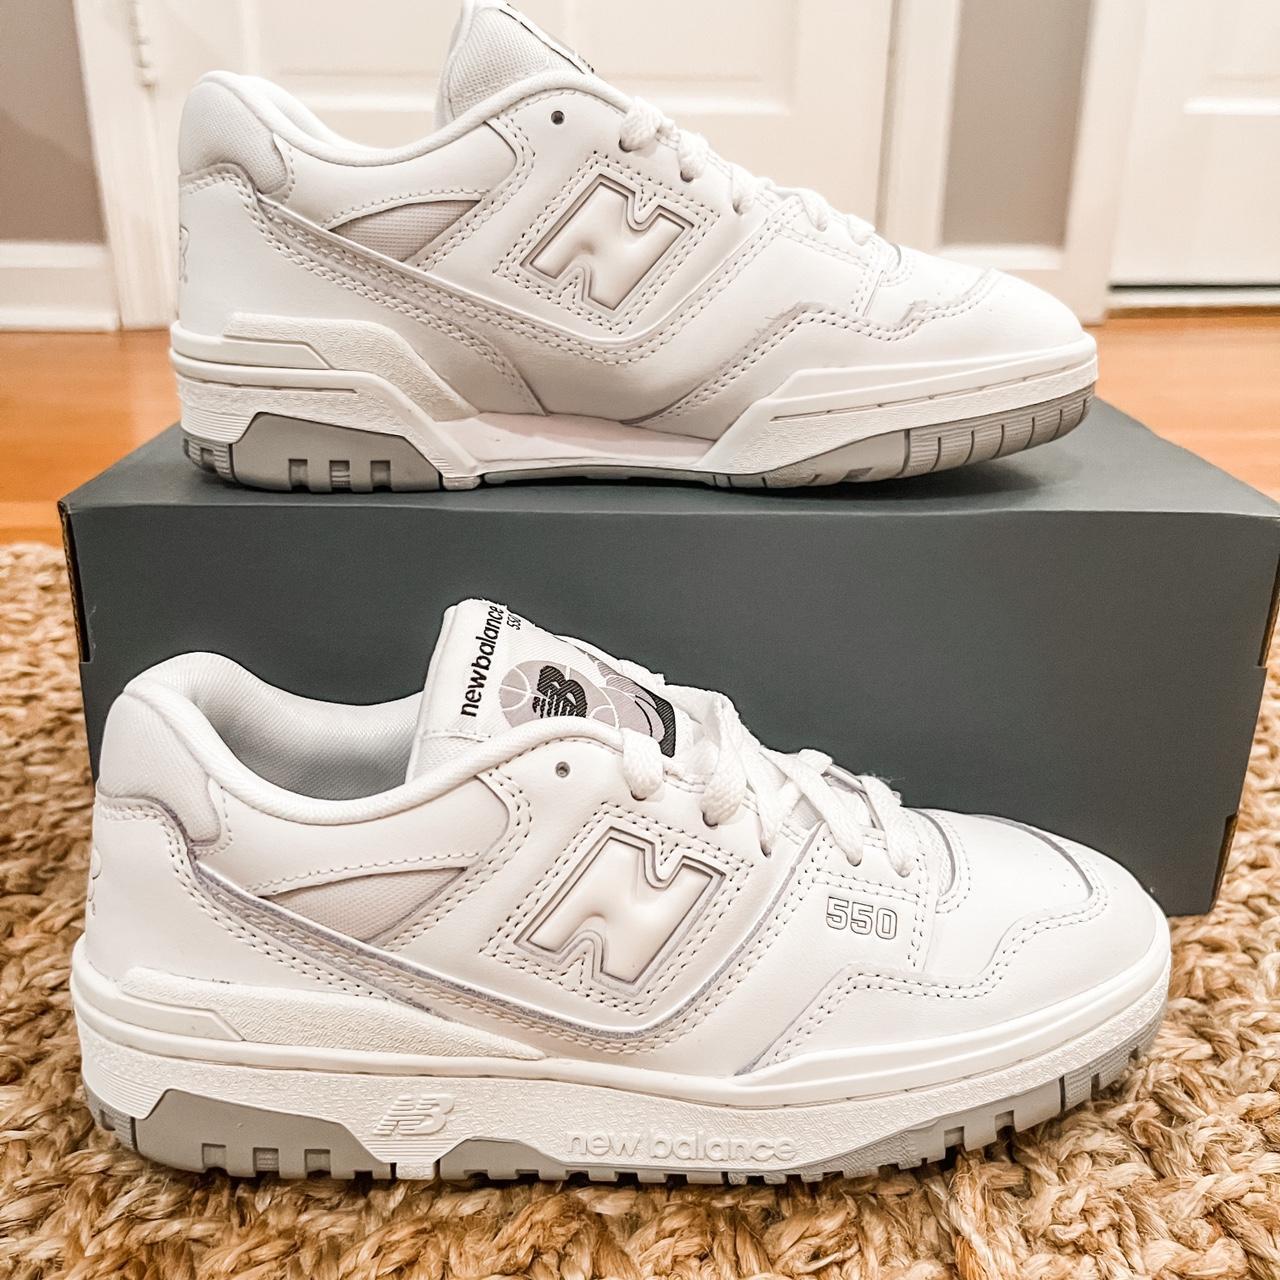 New Balance Women's White and Grey Trainers